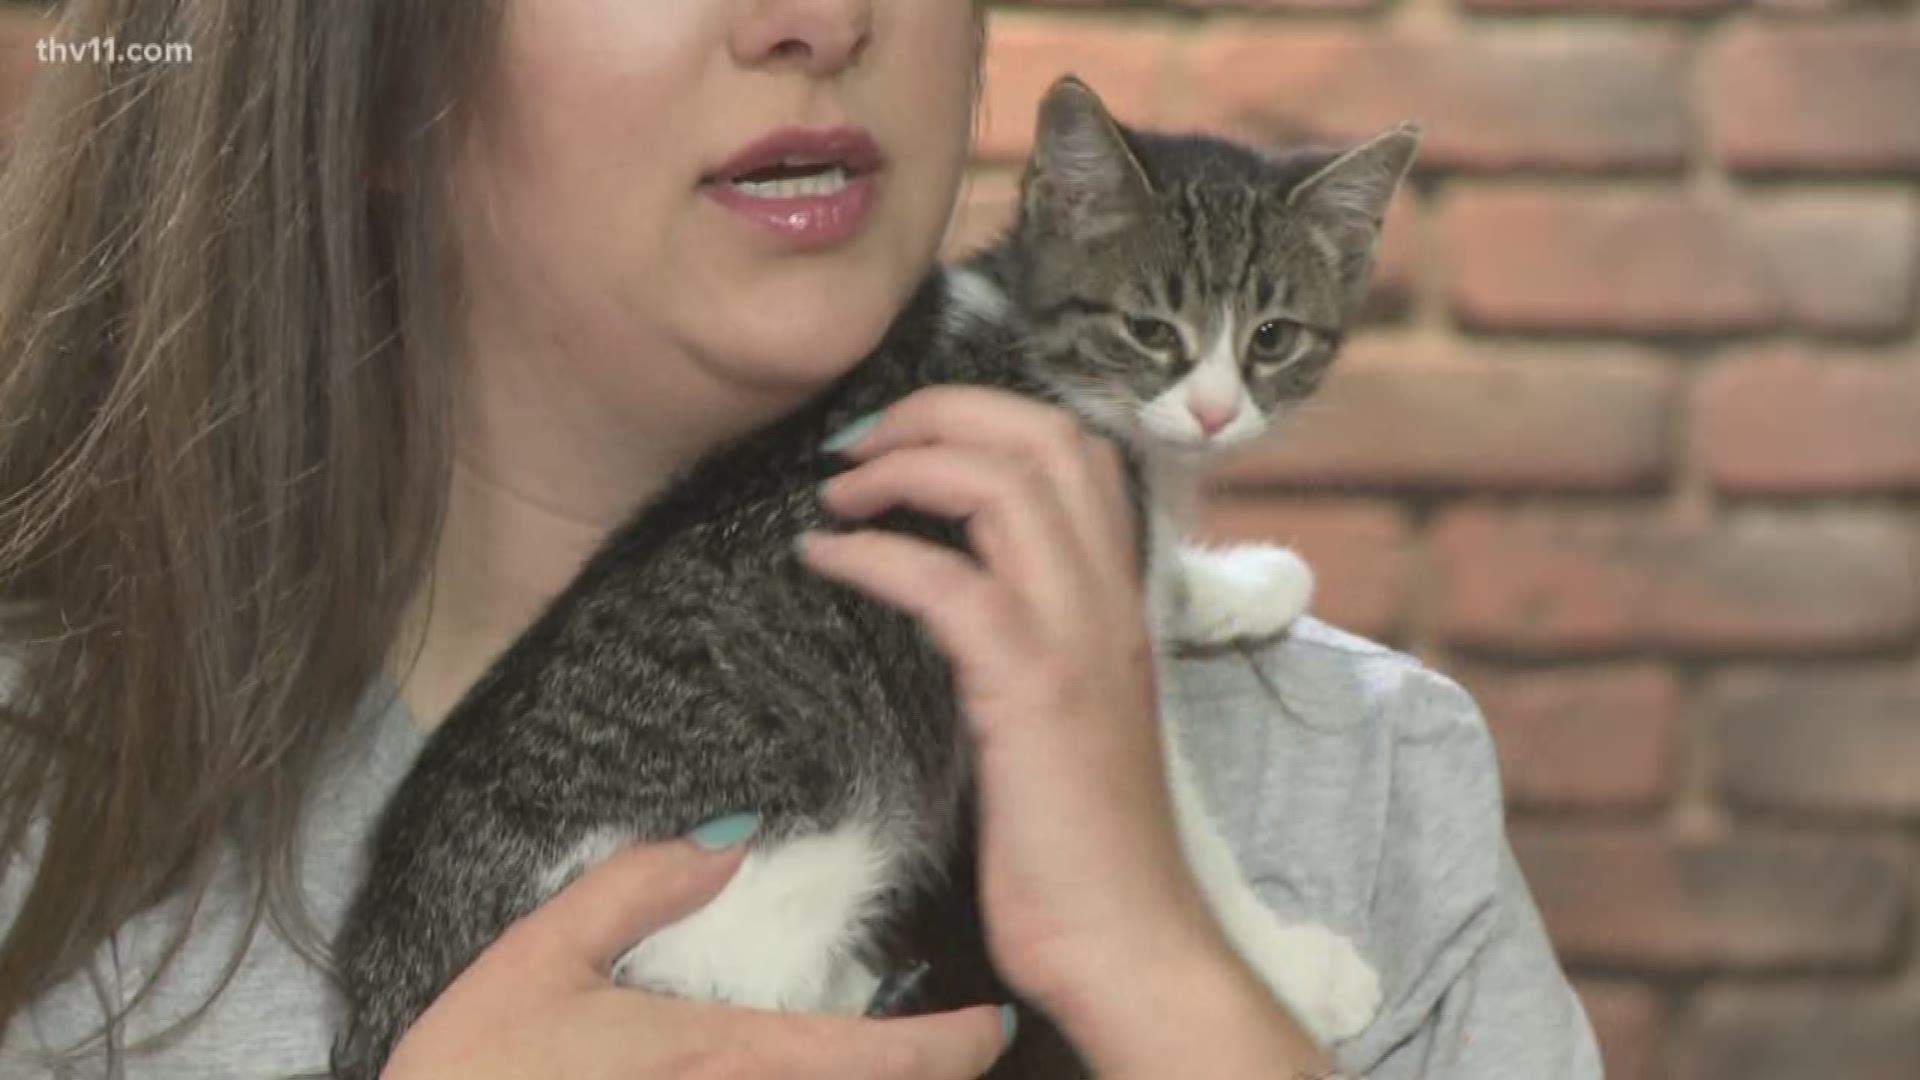 On Friday, Betsy Robb from Friends of the Animal Village joined THV11 This Morning with Roz, a 12-week-old tabby kitten.